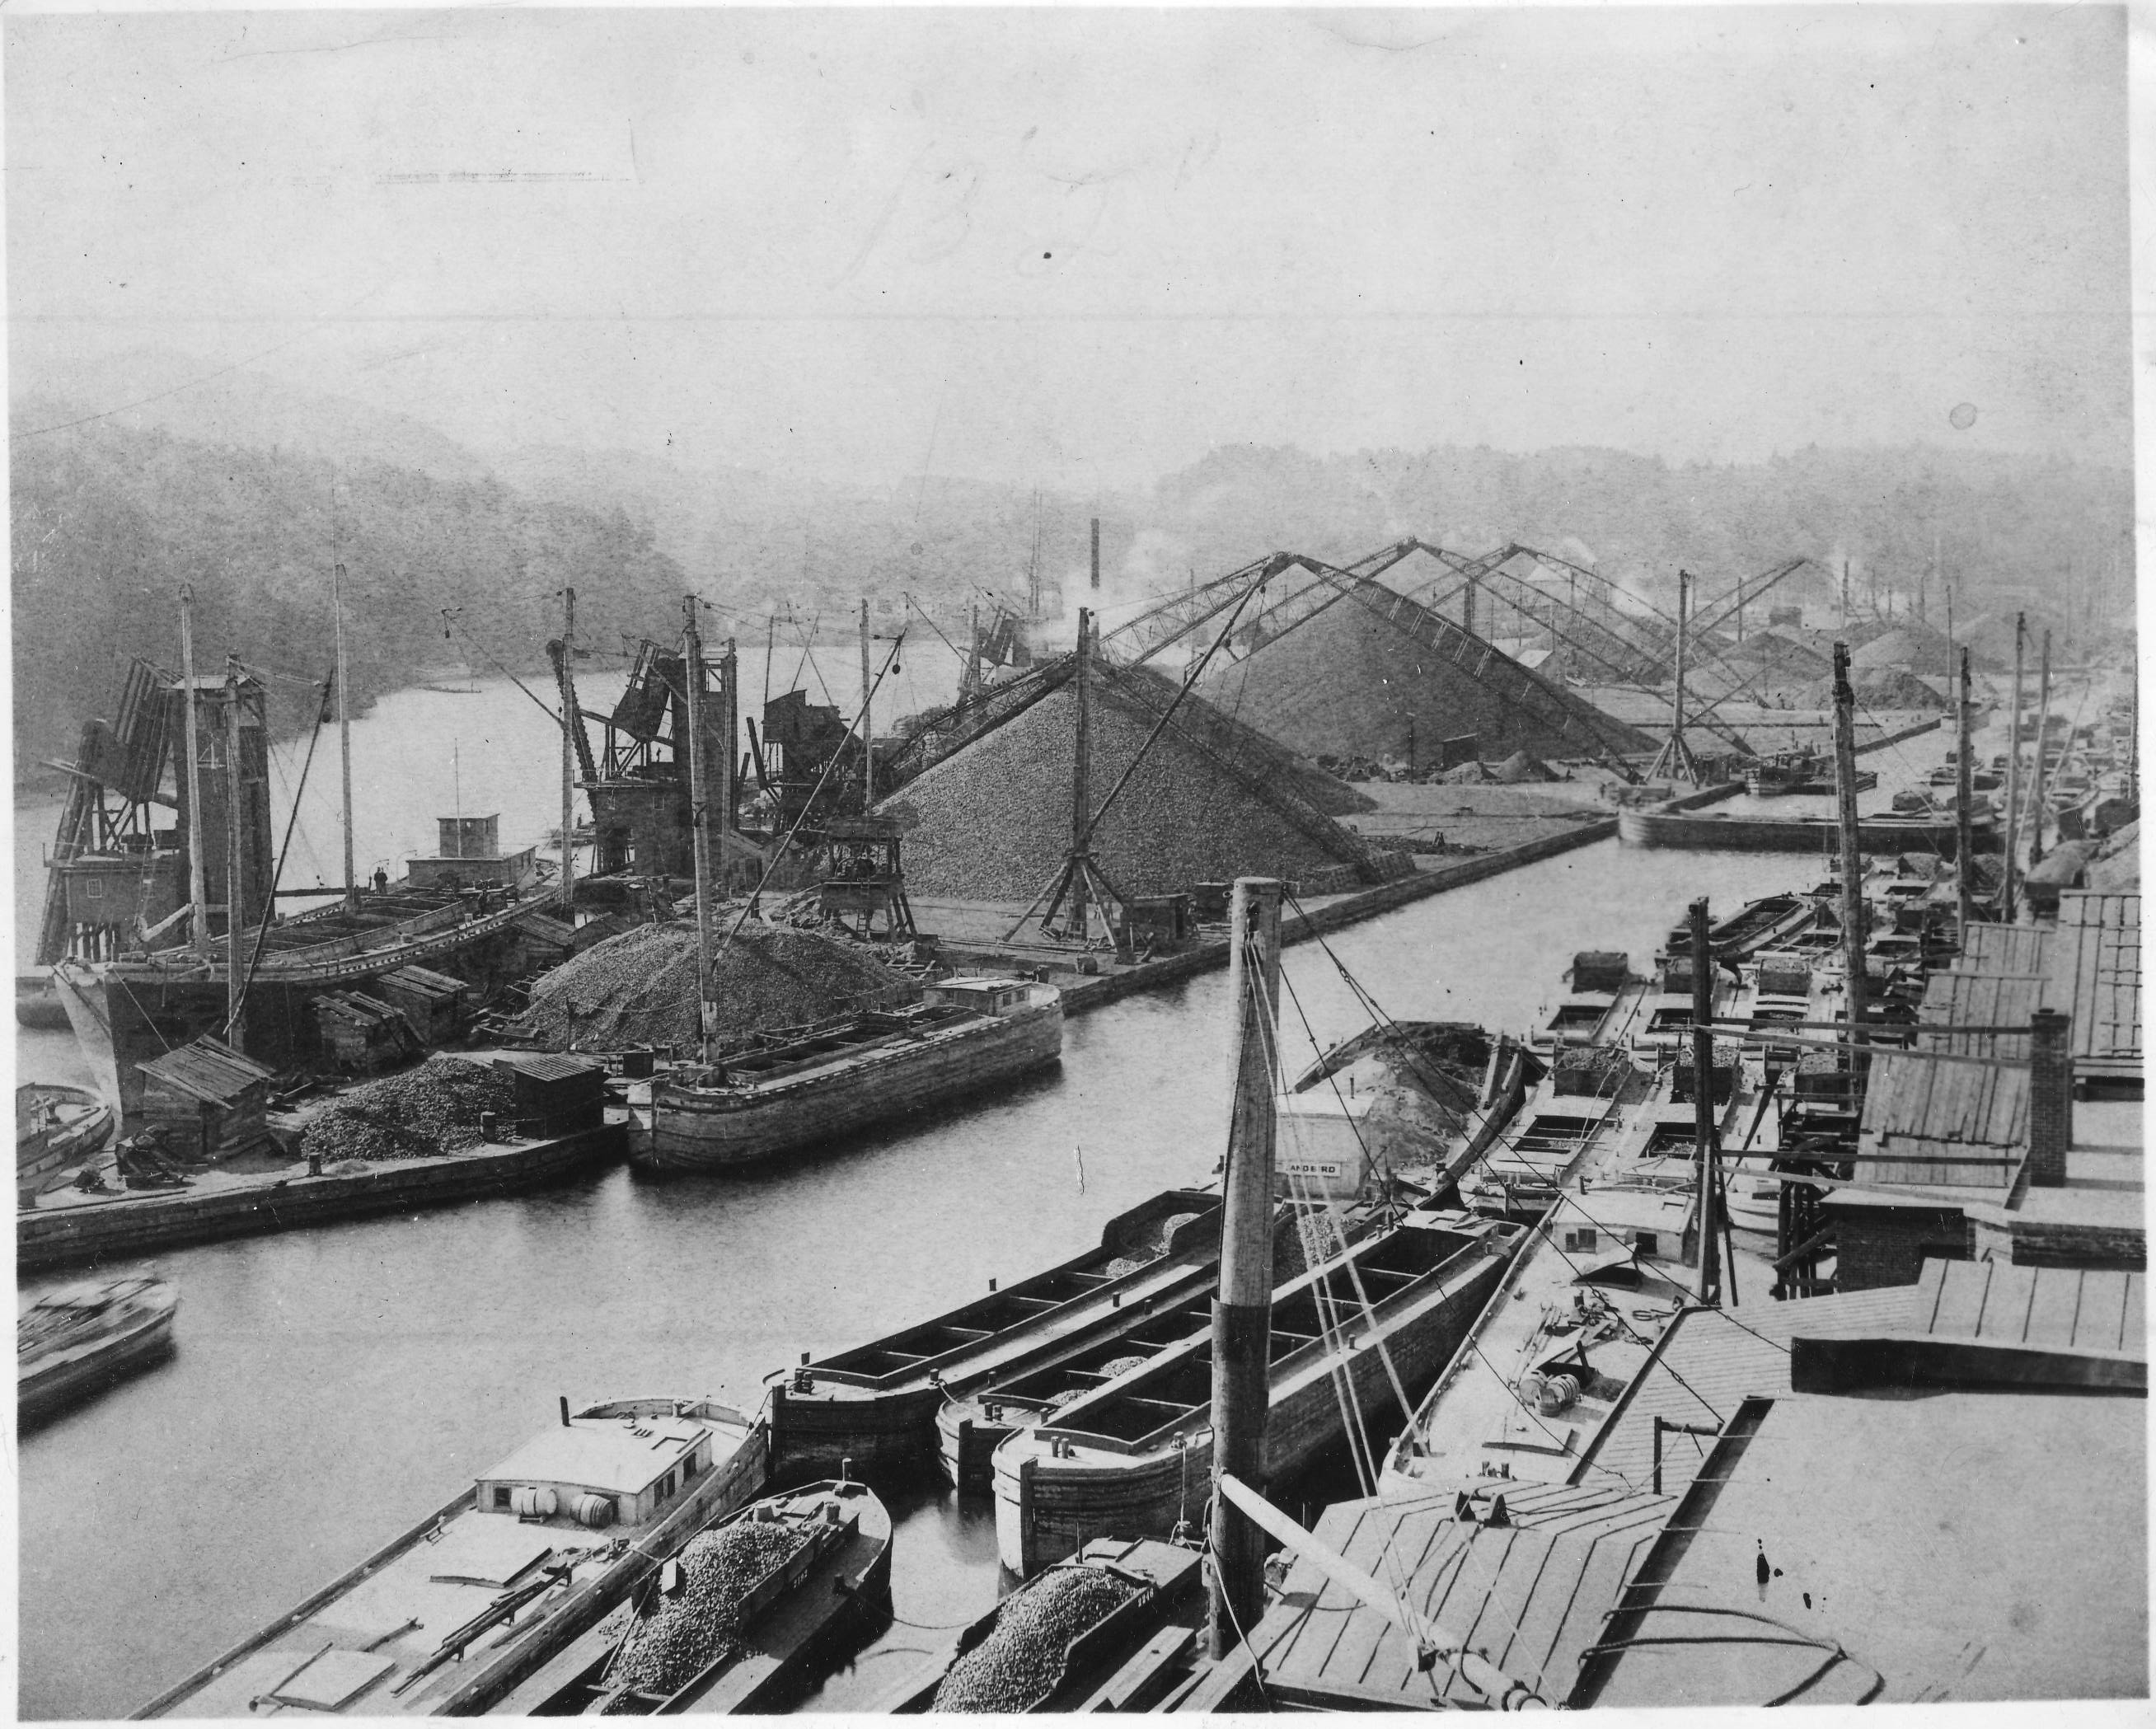 Circa 1880 view of Island Dock shows coal being transported in large quantity on the D&H Canal to Rondout. Note the many canal boats along the creek – some empty and some yet to be unloaded. Rondout became the most important port between Albany and New York for the shipment of coal and building materials like cement and bluestone on the Hudson River. The Rondout remains important; it is the only deep water port between Albany and New York, making it the perfect safe harbor for passenger ships.  HRMM Collect